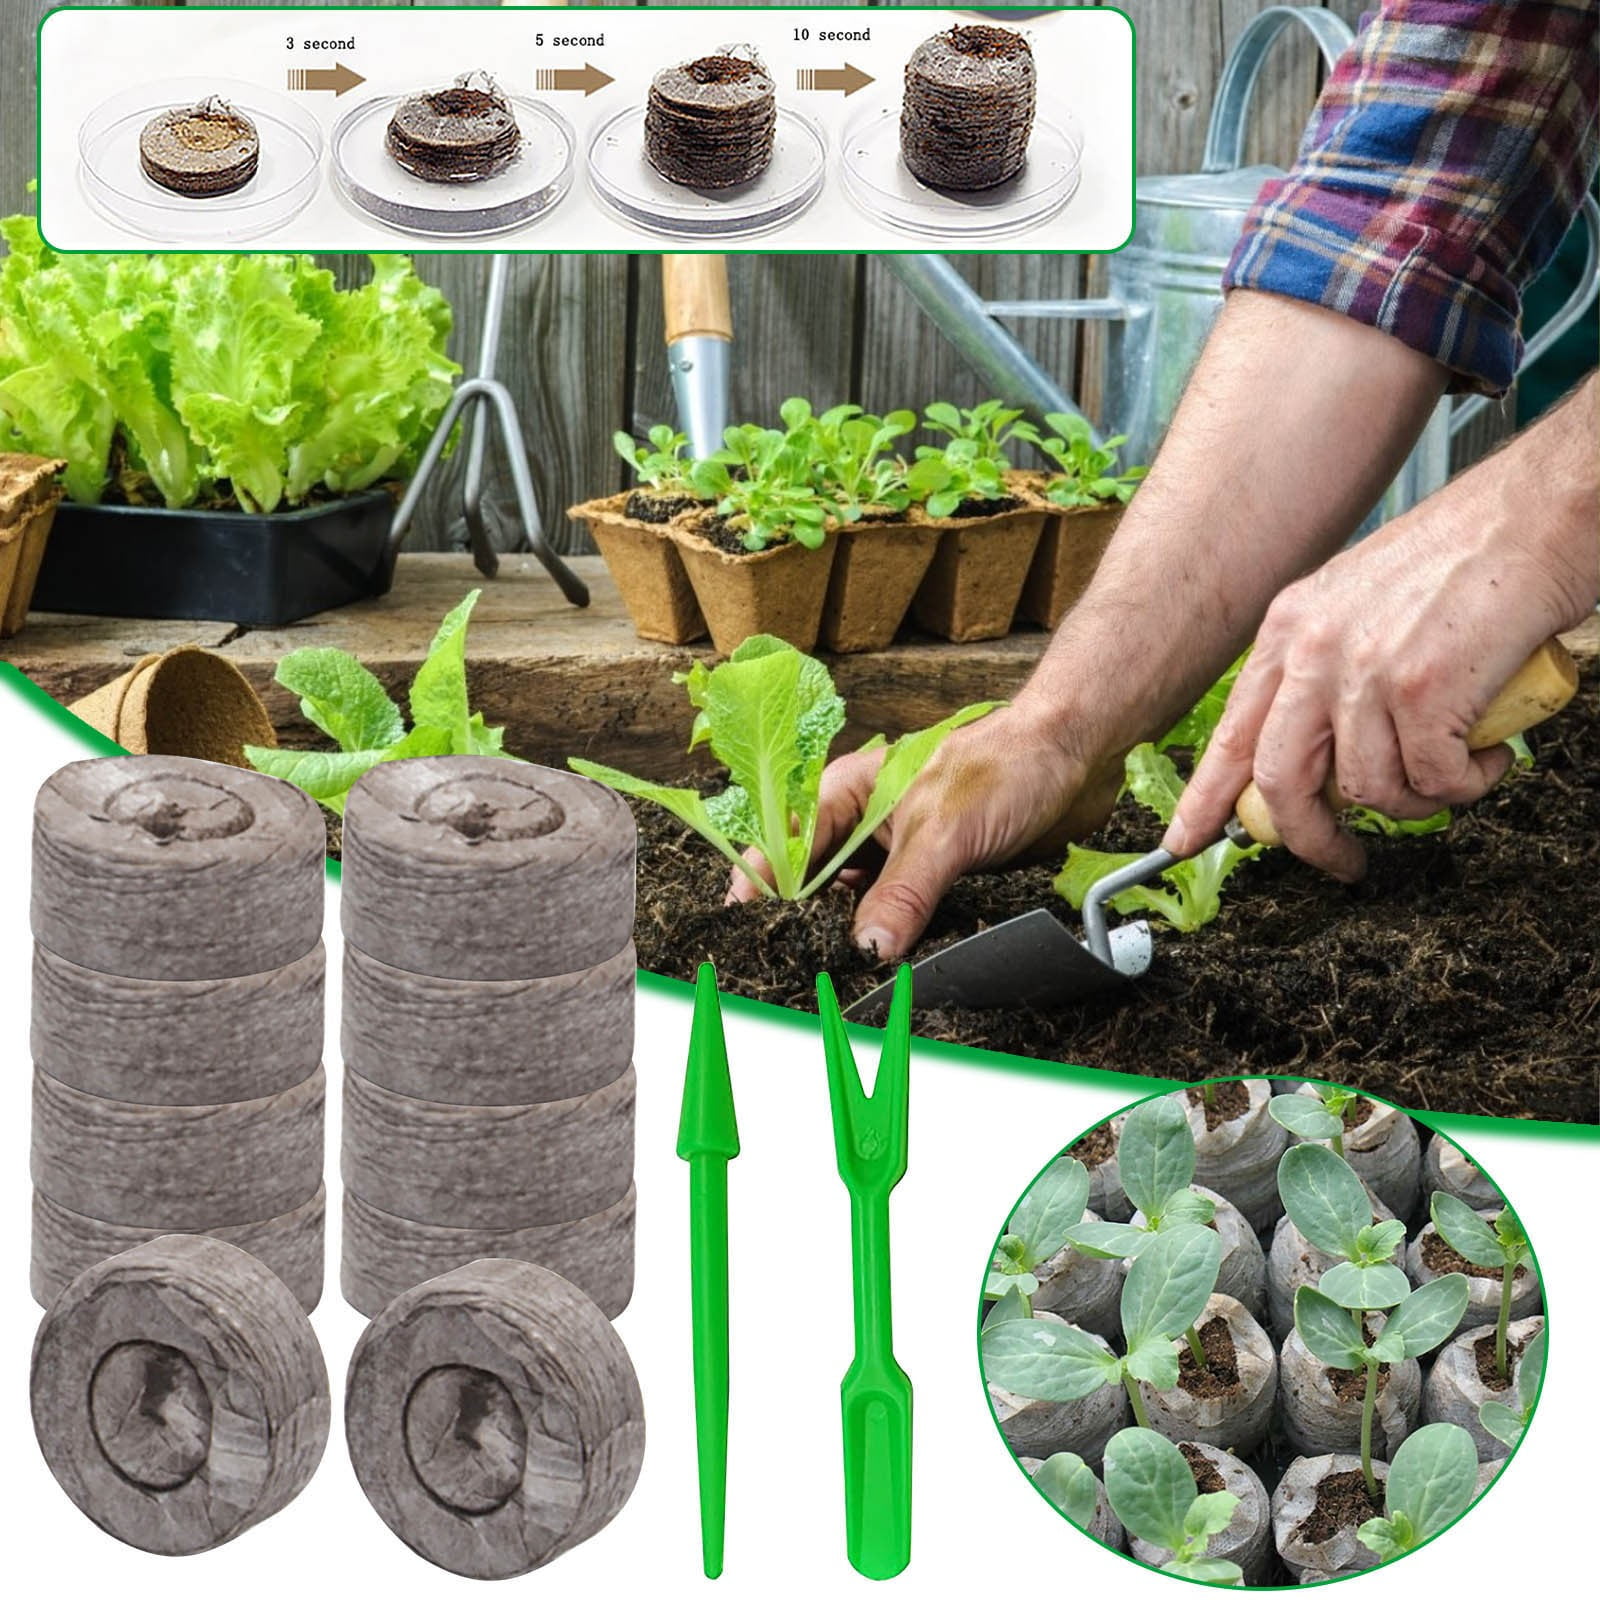  Coco Coir Seed Starter Pellets : 40 Coconut Coir Plugs for  Growing Plants – Peat Free Seedling Soil – Seed Starter Kit with Potting  Soil Pellets – 40 Starter Plugs –